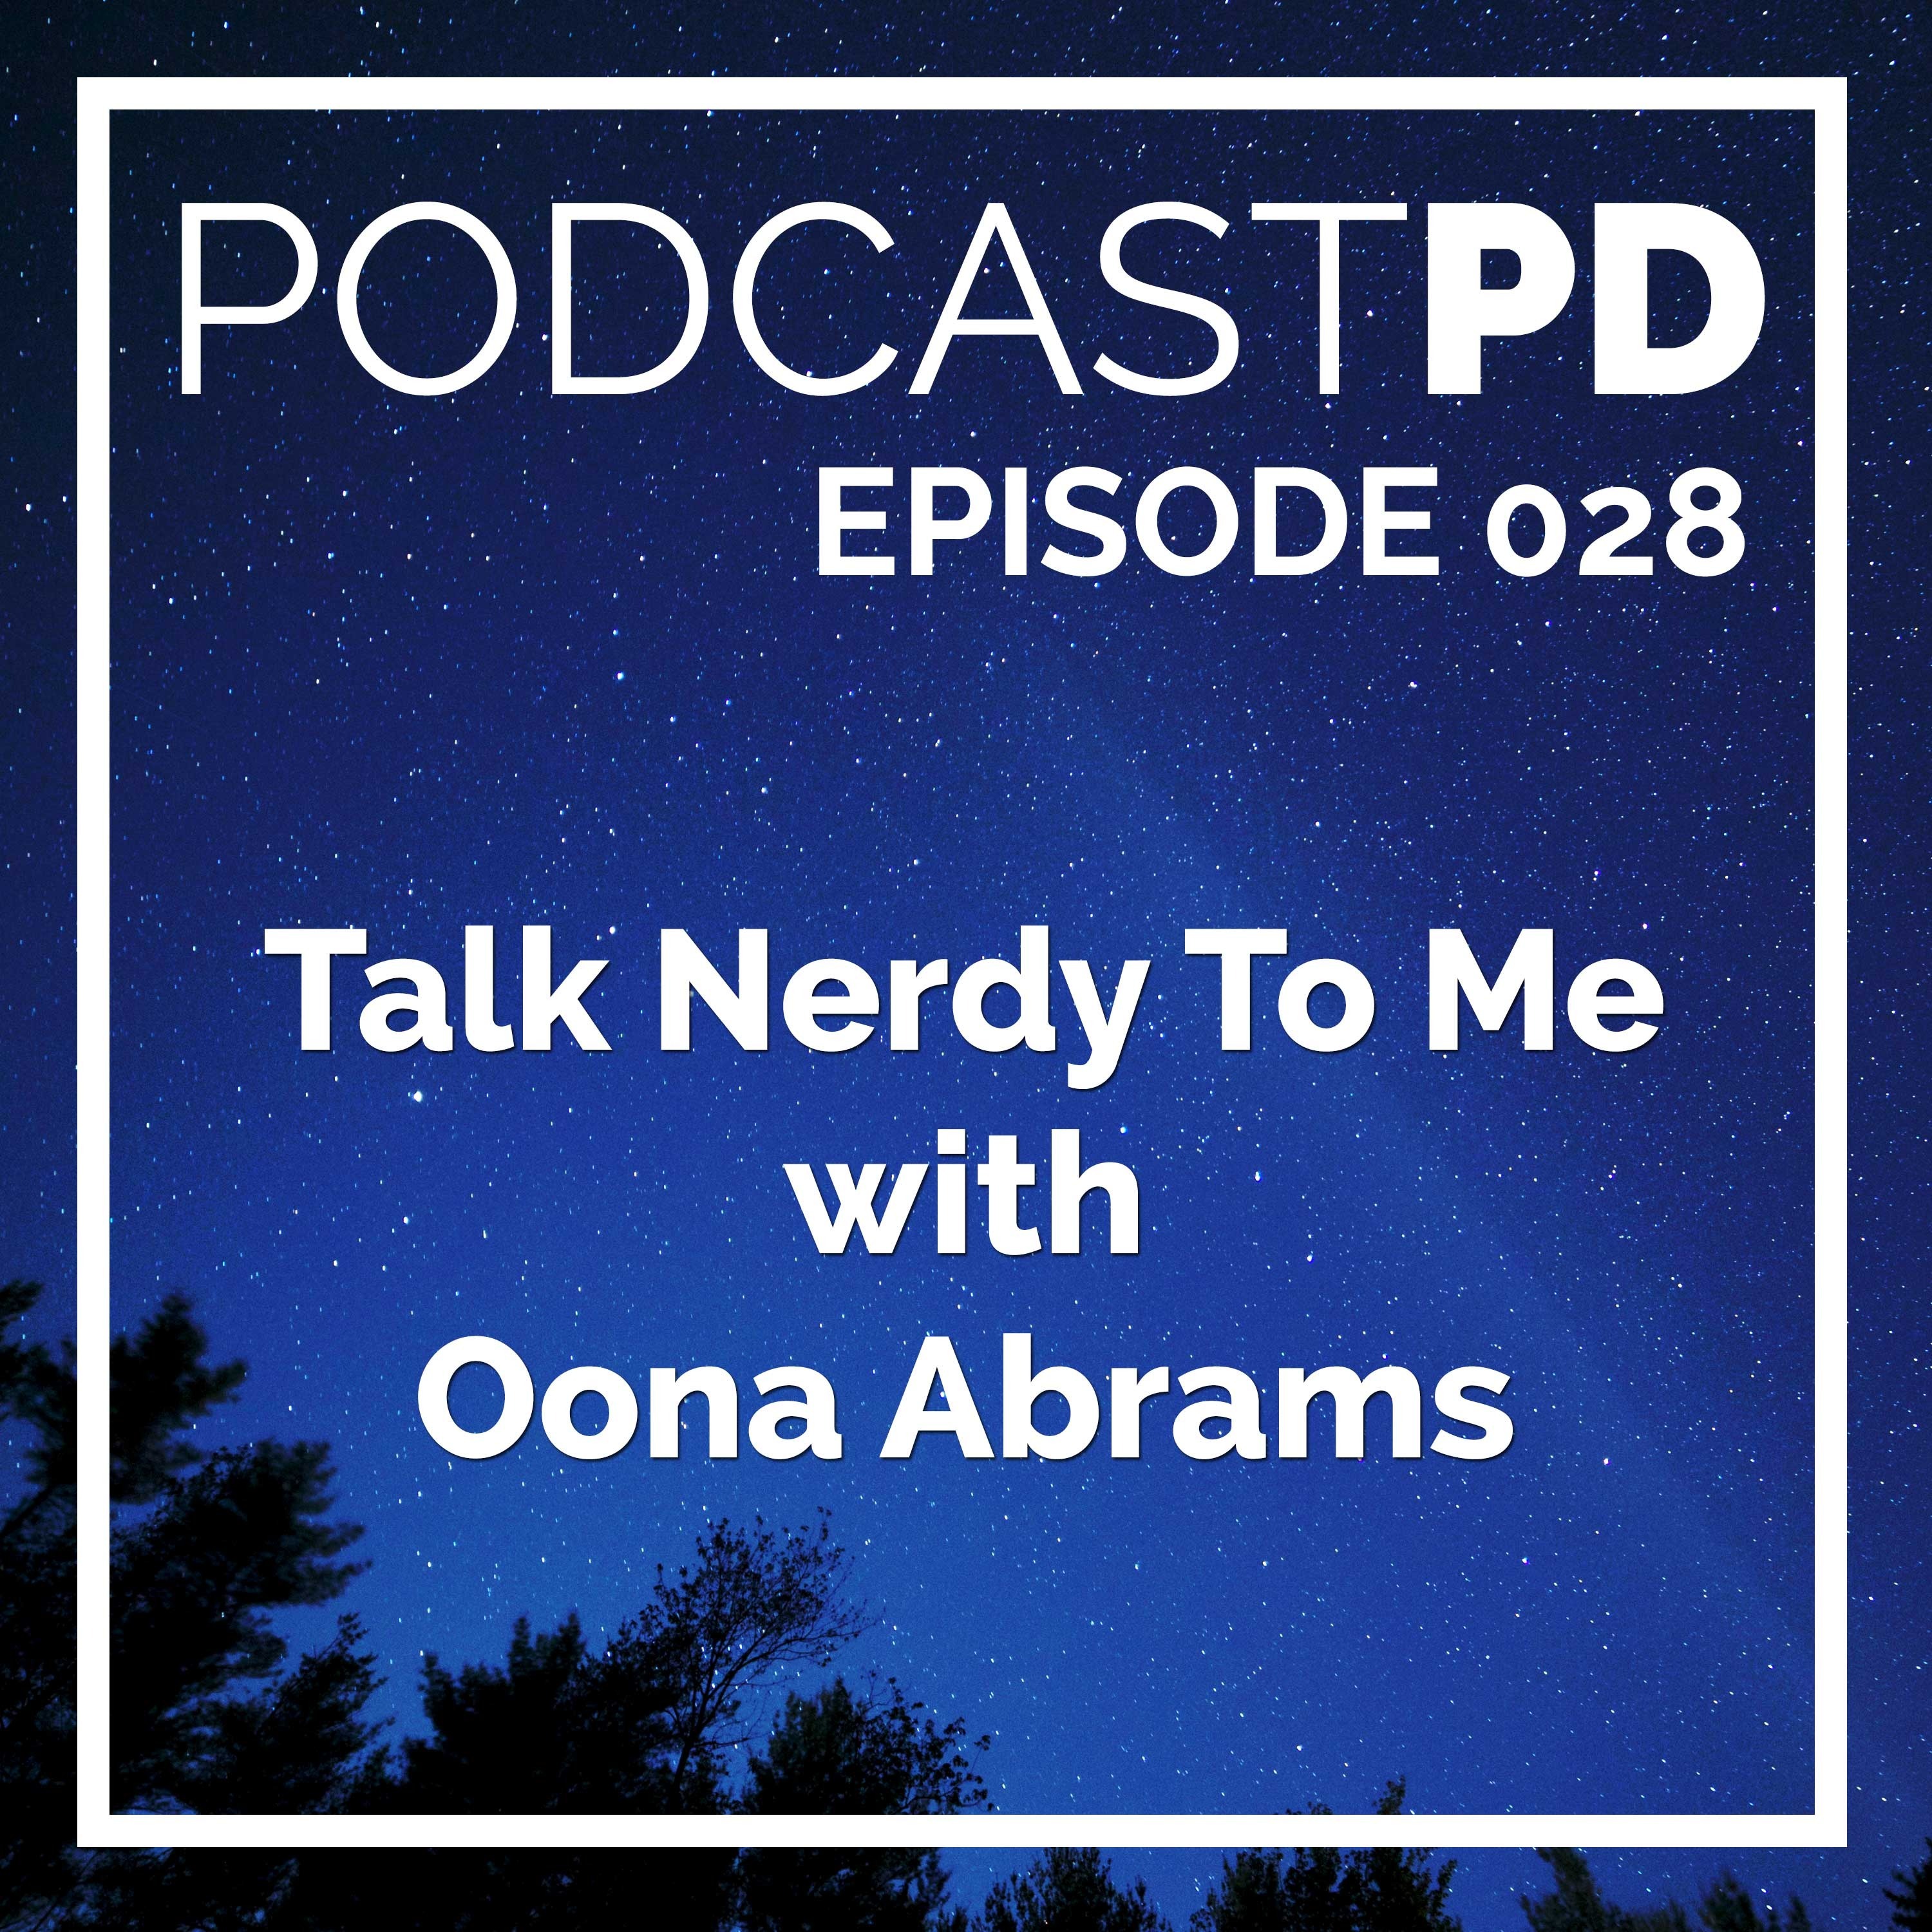 Talk Nerdy To Me with Oona Abrams Image